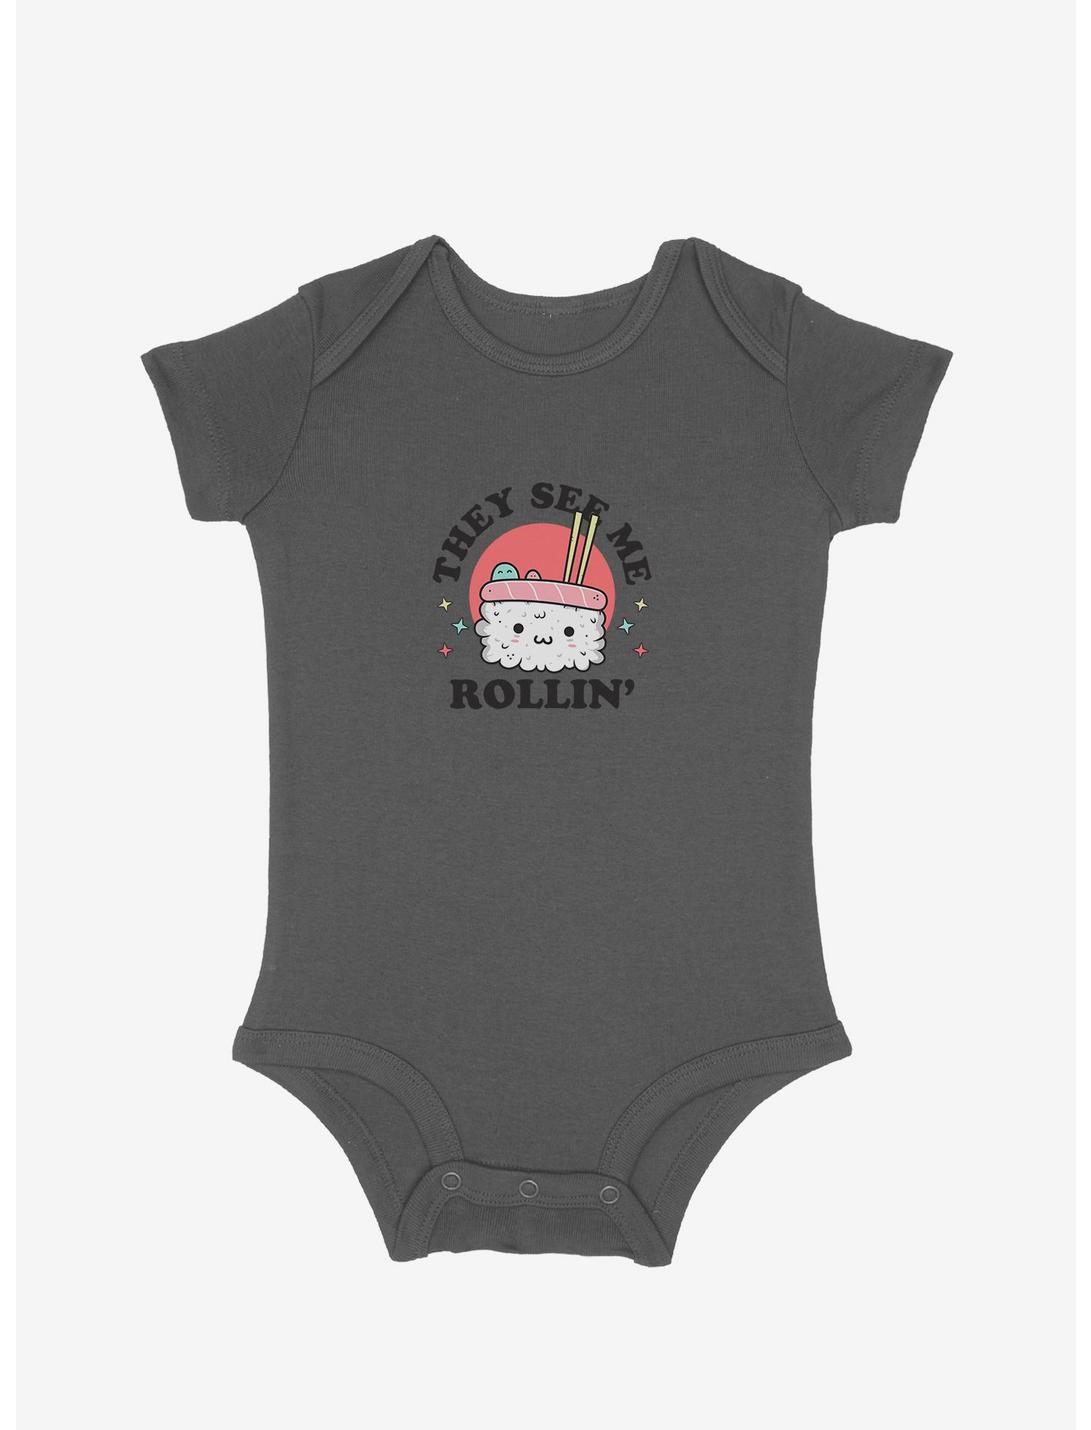 Mommy & Me They See Me Rollin' Infant Bodysuit, GRAPHITE HEATHER, hi-res